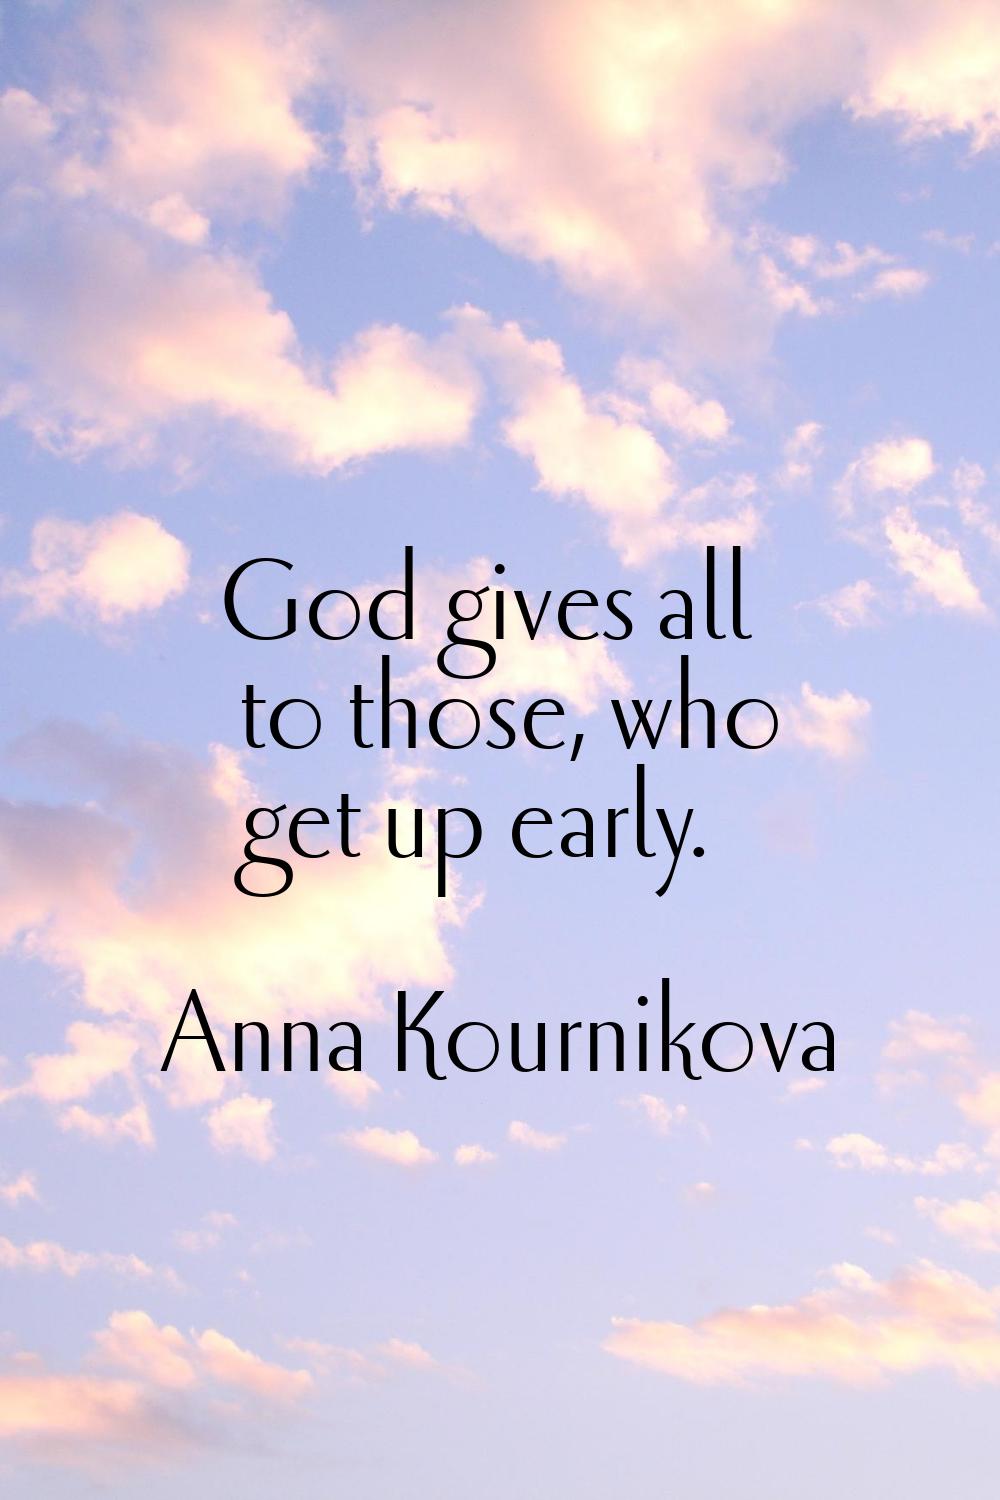 God gives all to those, who get up early.